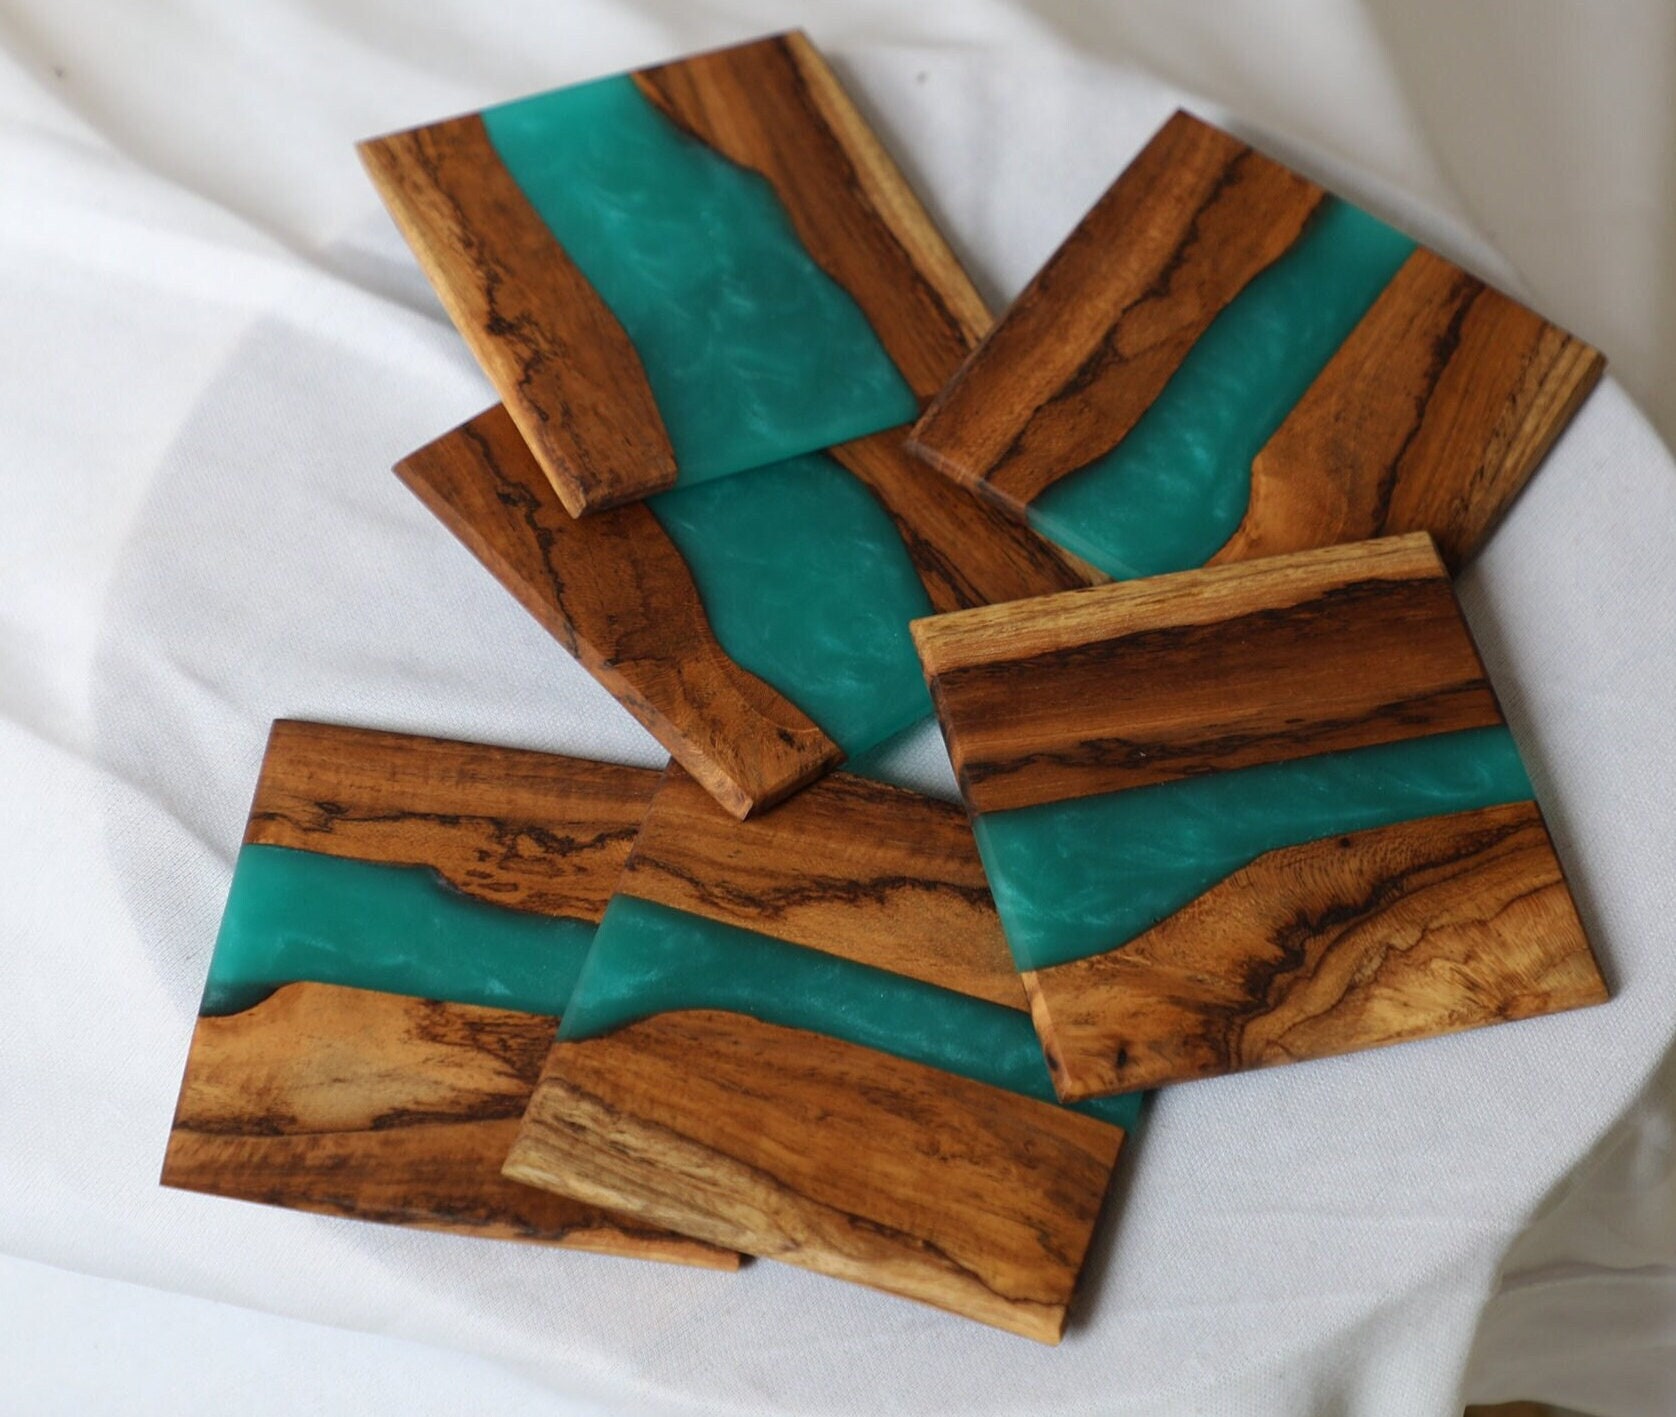 Wooden Coasters Set of 4, Wood Coasters, Wooden Table Decor, Natural Wood  Coasters, Rustic Coasters, Drink Coasters, Coaster Set, Coasters 